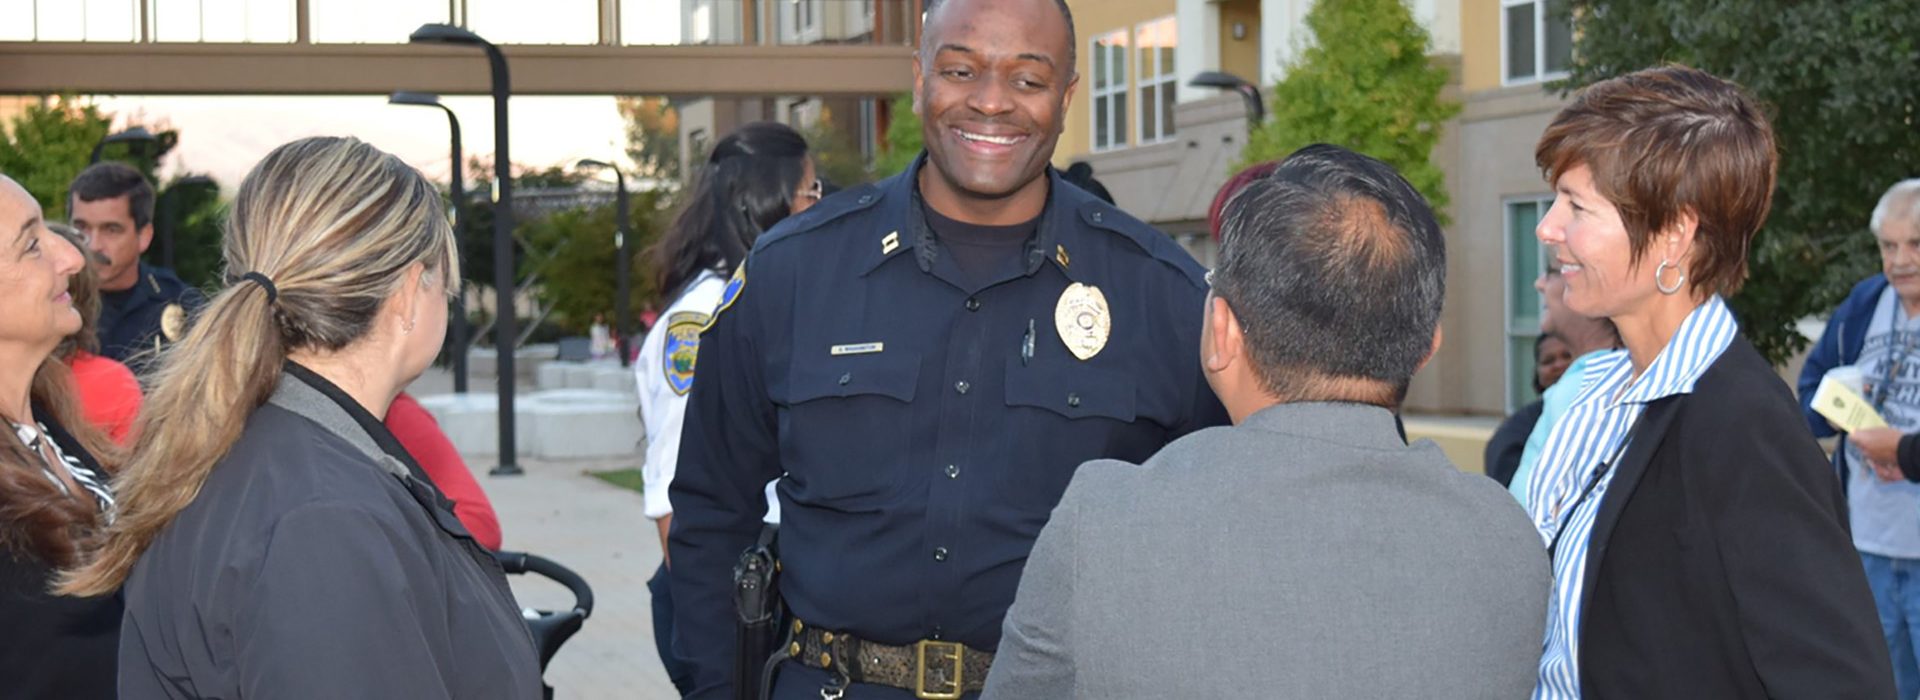 Fremont Police Department in the community